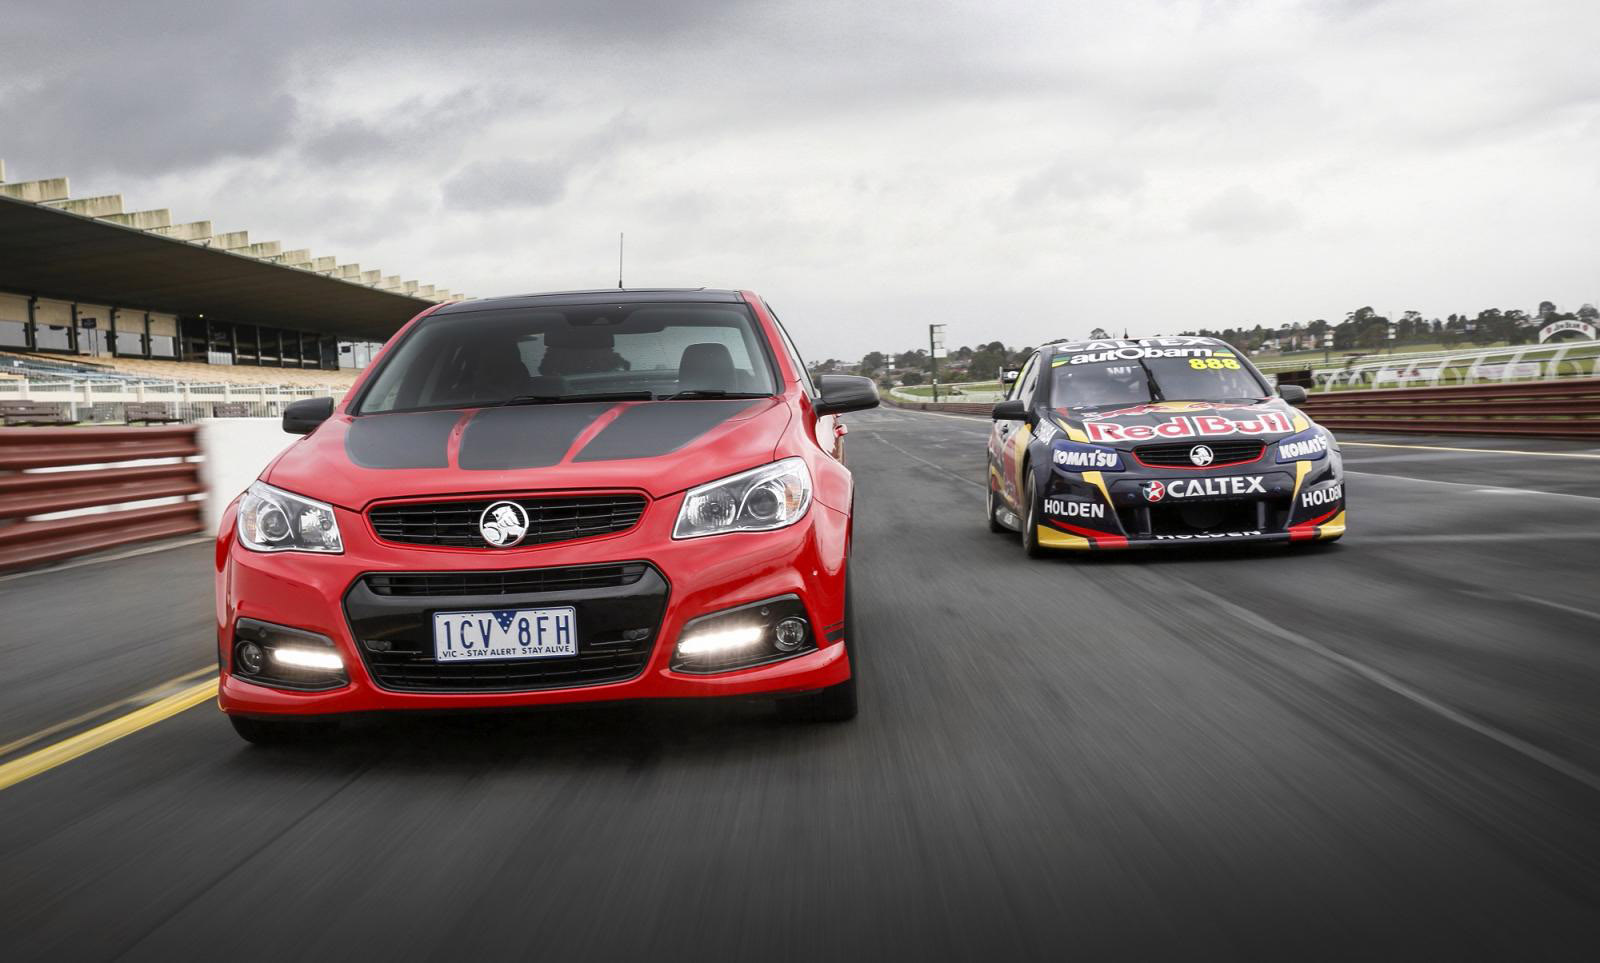 Holden Commodore Craig Lowndes SS V Special Edition